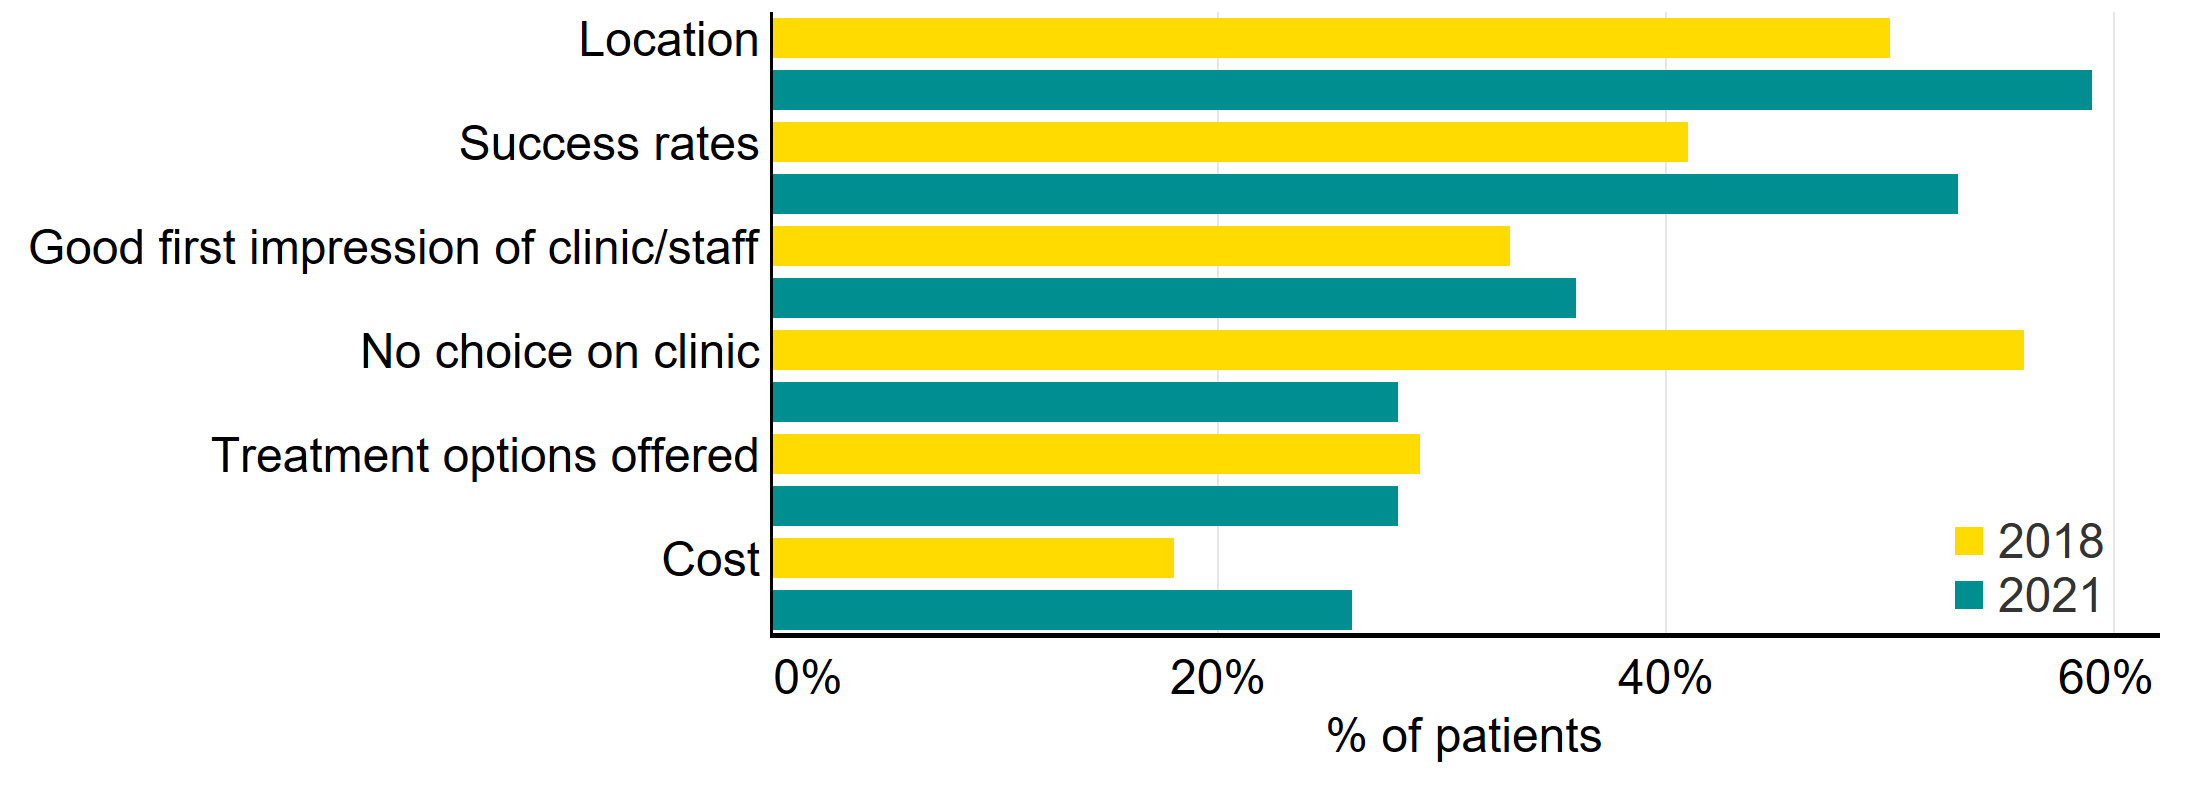 Figure 11: Most important factors when choosing a clinic, 2018 vs. 2021. Most important factors when choosing a clinic, 2018 vs. 2021. This bar chart shows the most important factors when choosing a clinic, comparing results from the 2018 and 2021 Patient Surveys. Location (59%) and success rates (41%) were the most important factors in 2021, and had both increased since 2018. Cost was the least important factor, however it has increased by +8% between 2018 and 2021. An accessible form of the underlying data for this figure can be downloaded at the start of the report in .xls format.